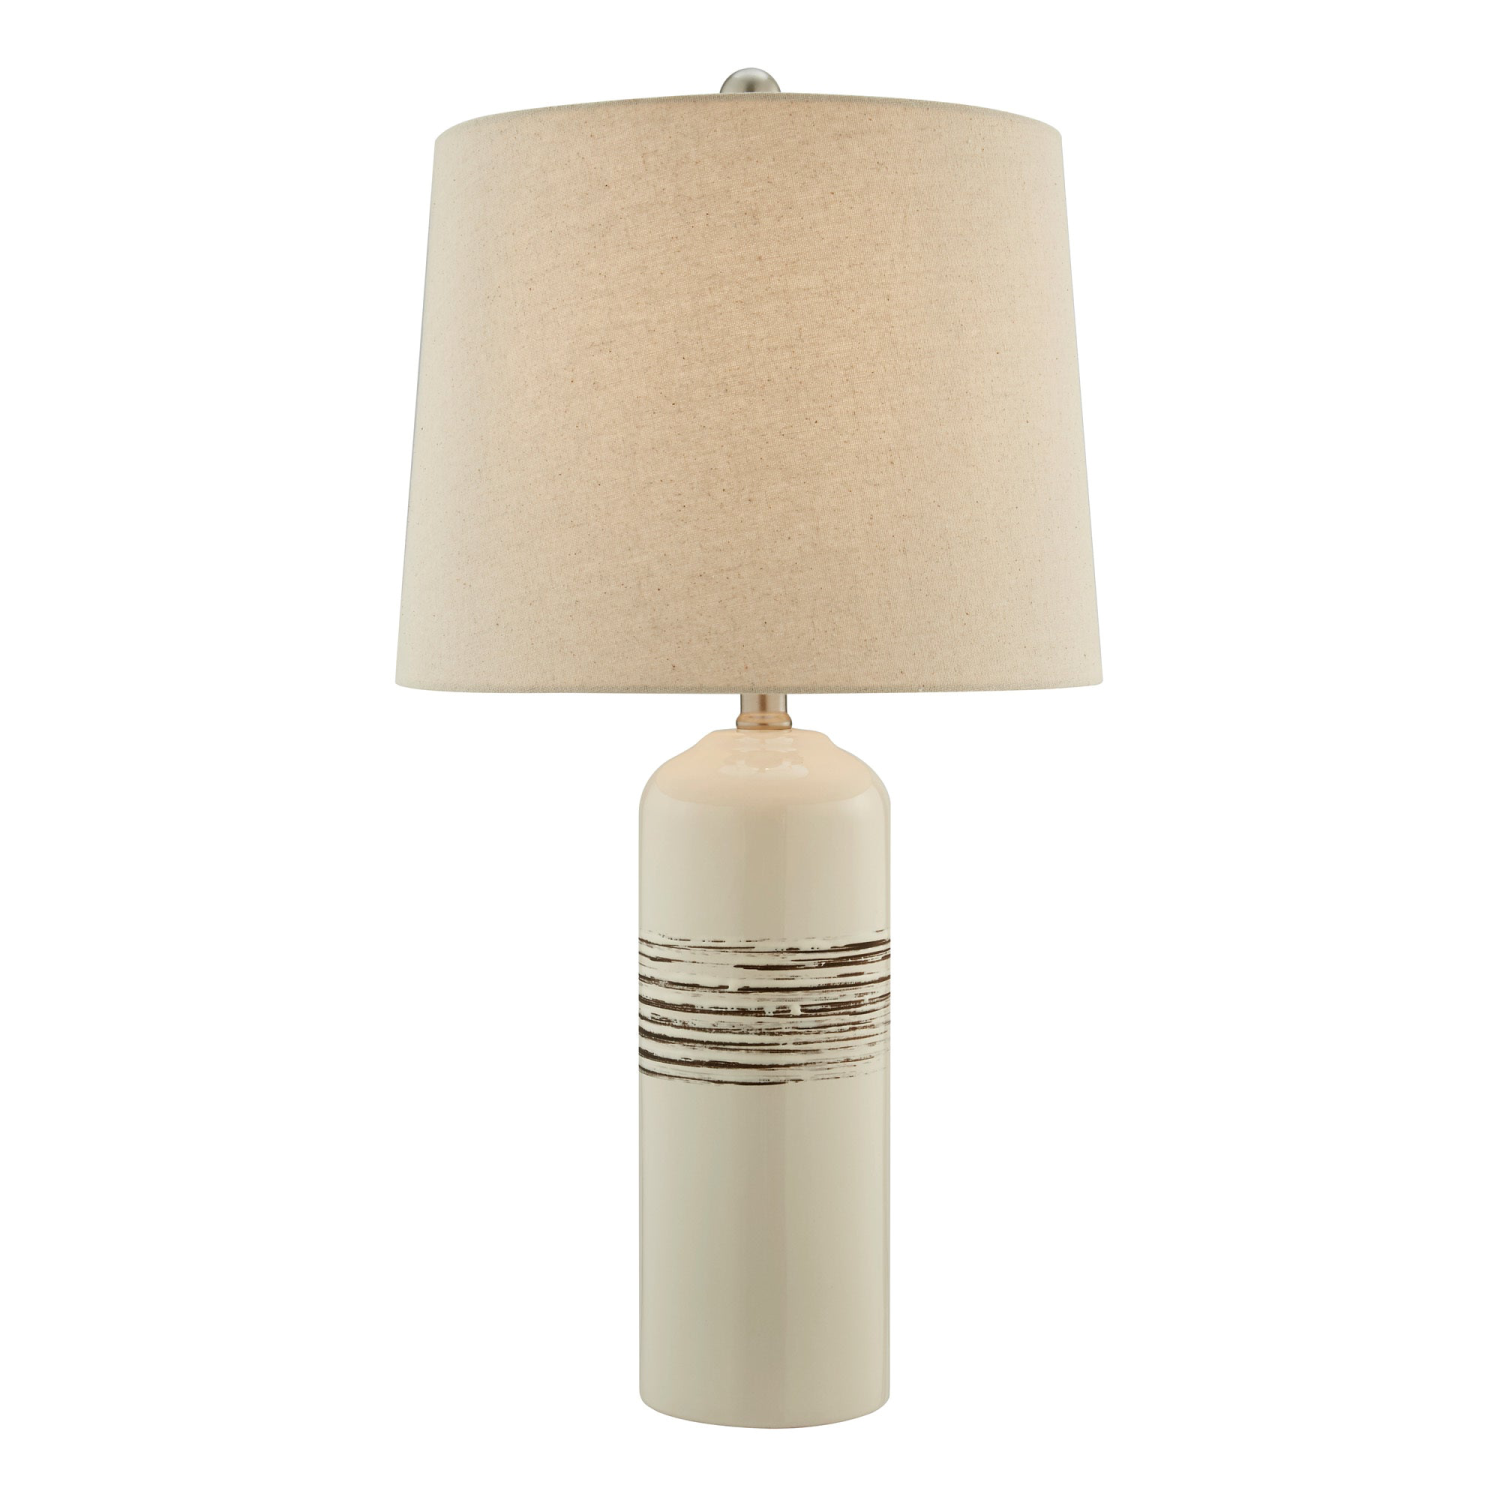 Noelle Table Lamp Picture with White Background